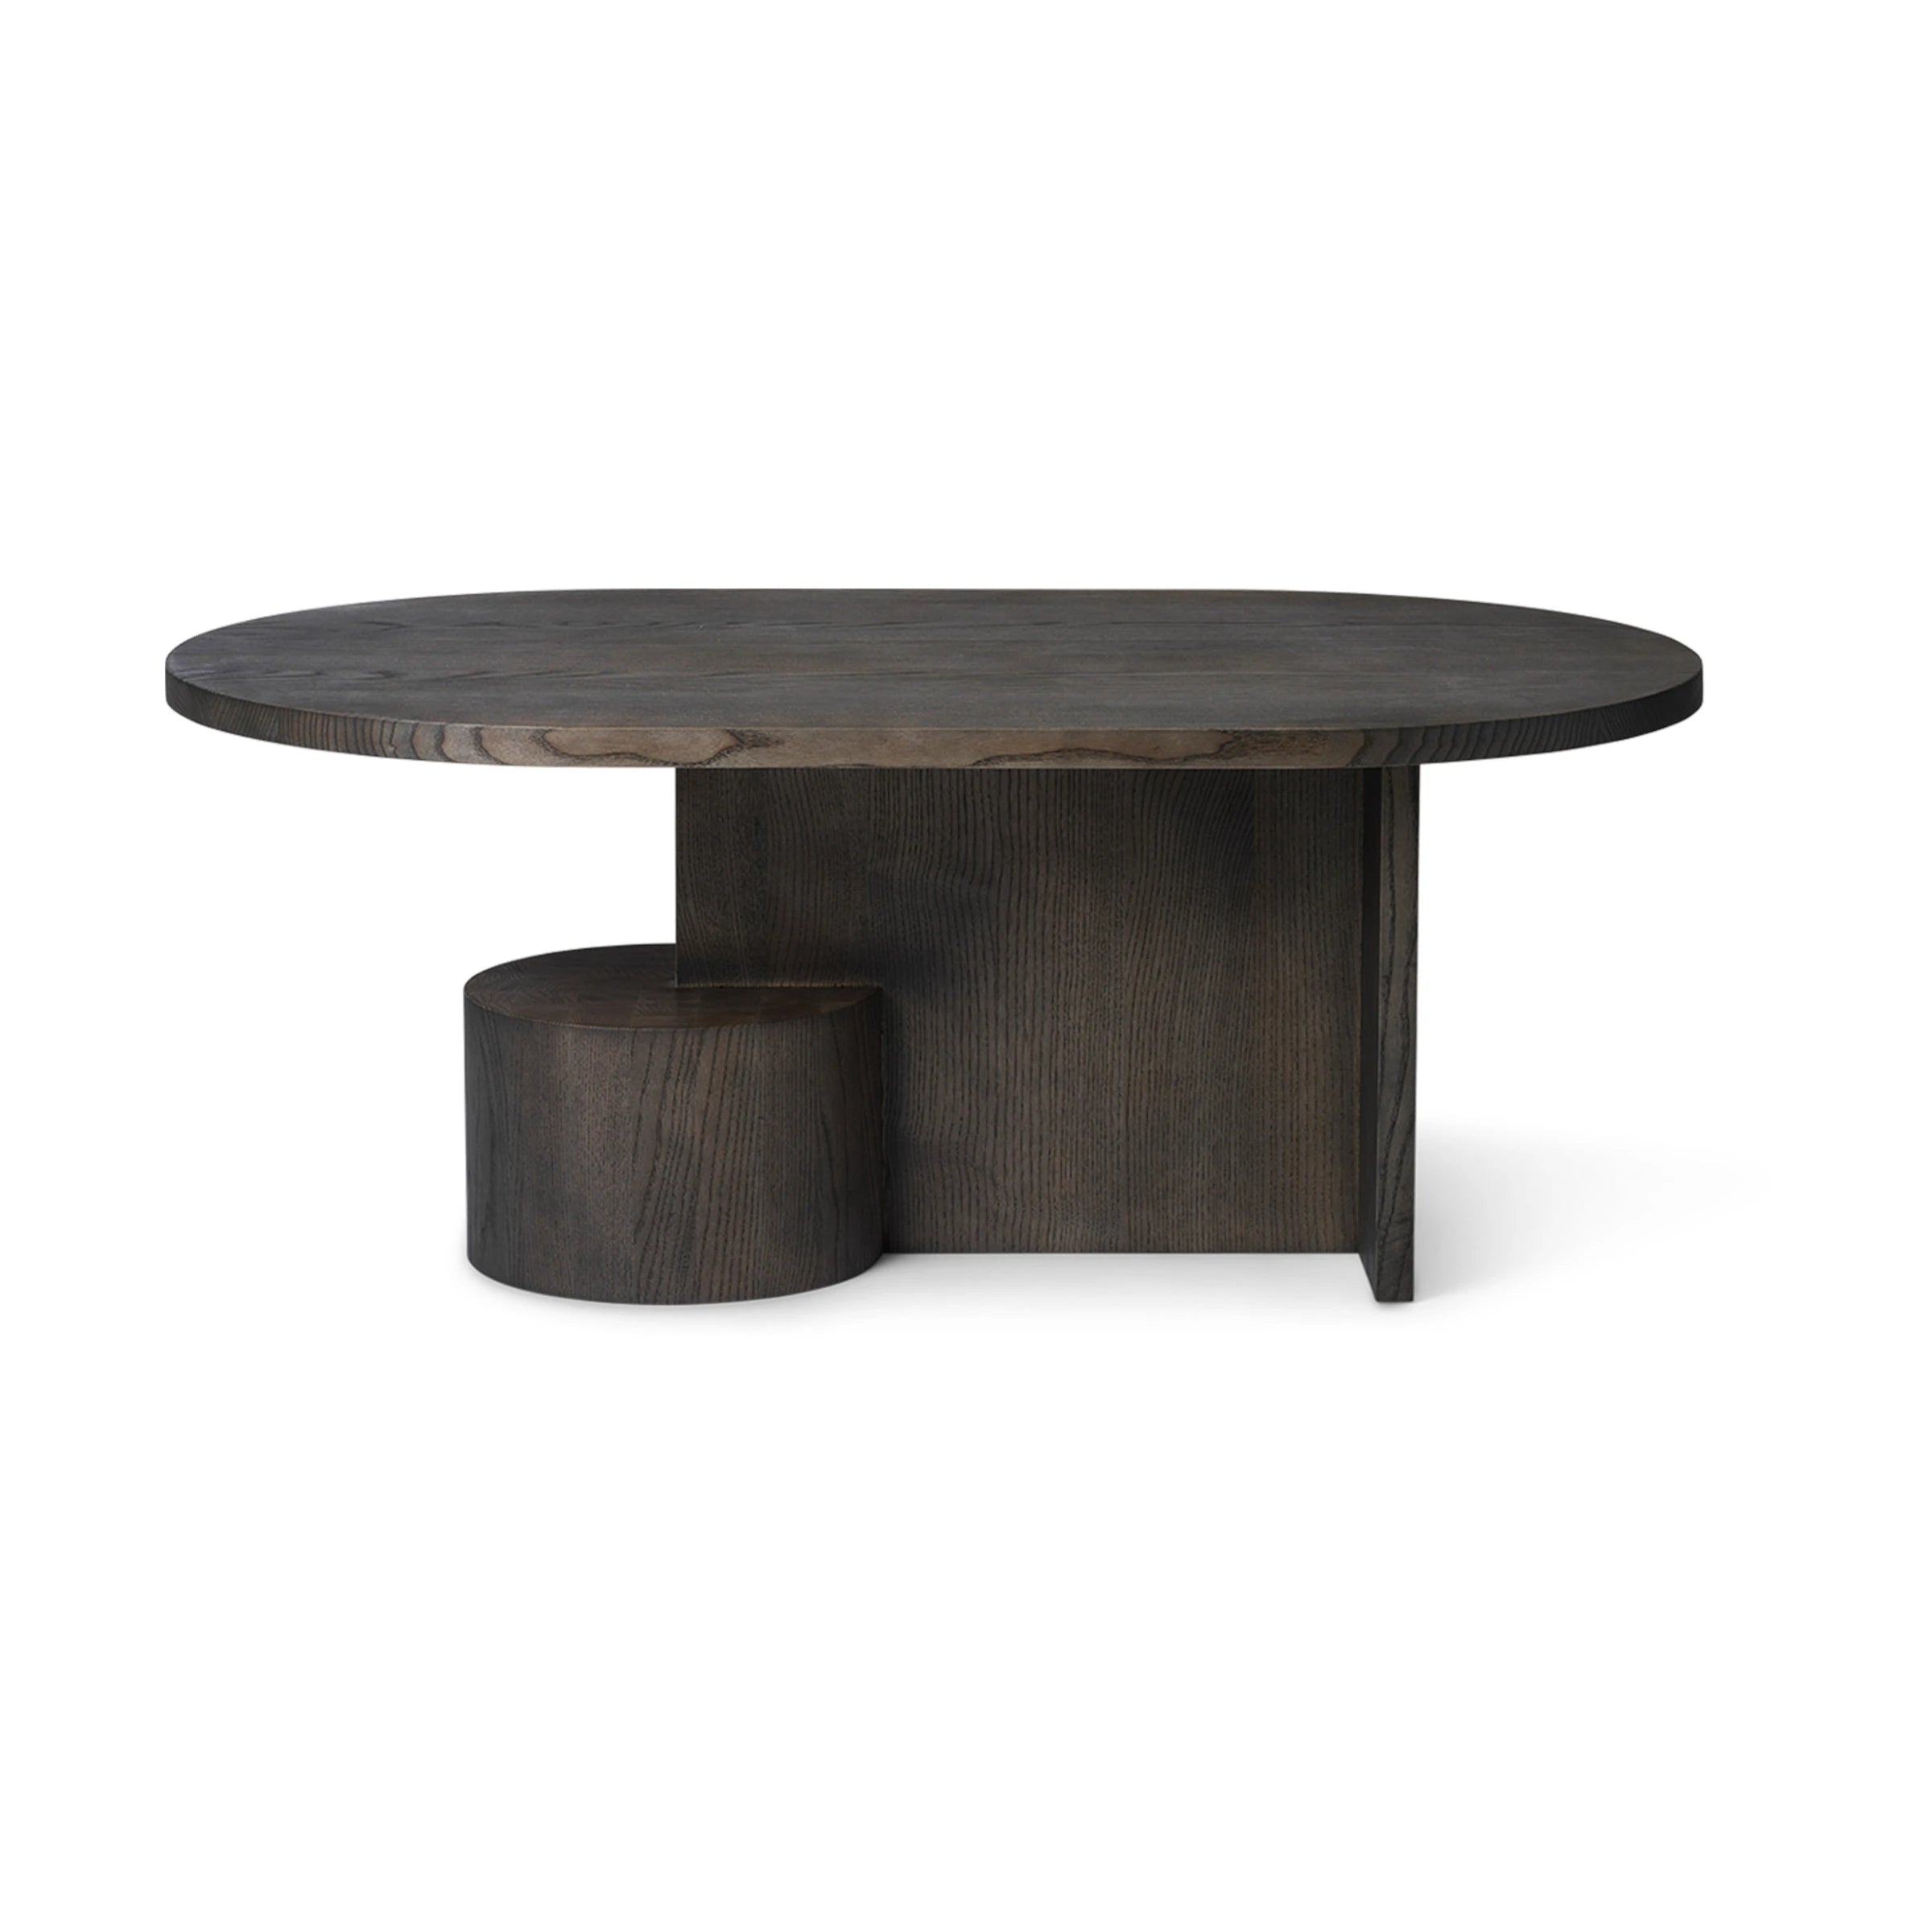 Insert Coffee Table in Black Ash or Natural Ash - Lifestory